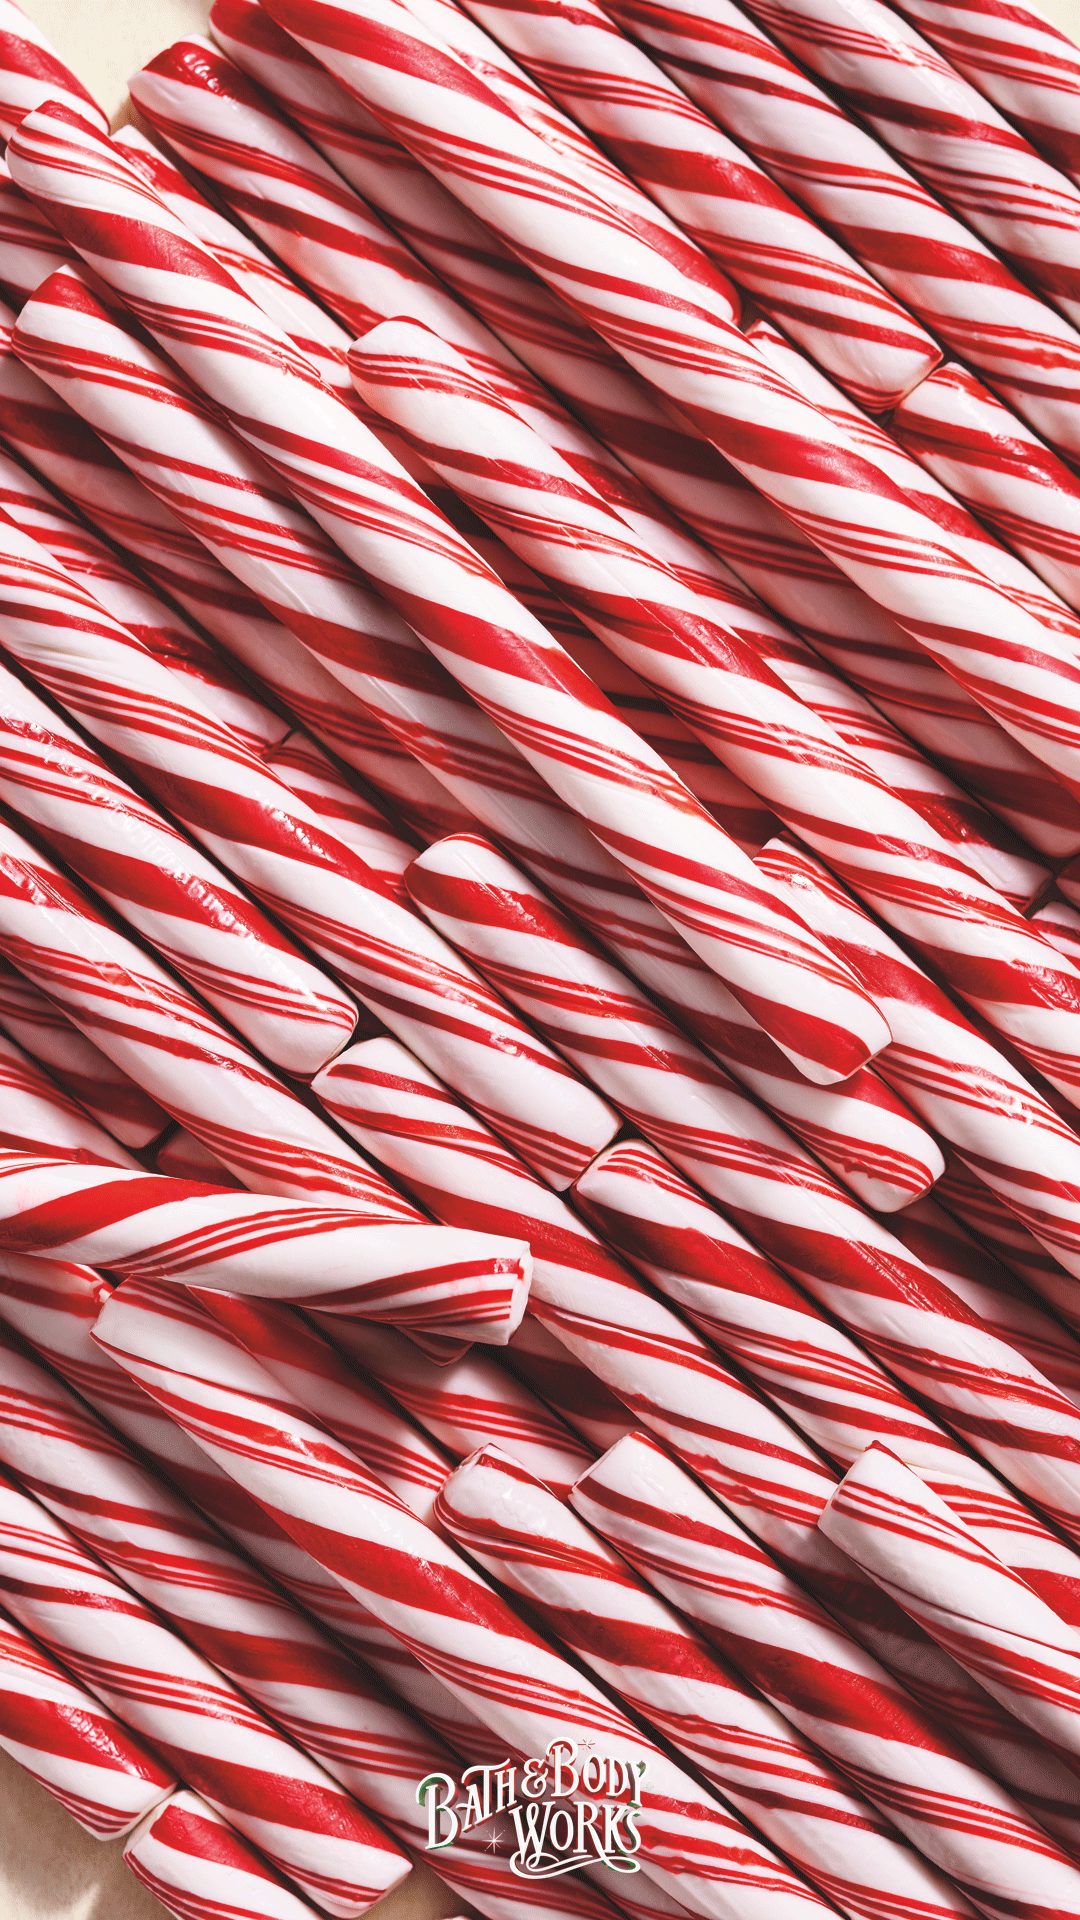 Candy Cane iPhone Wallpaper. Wallpaper iphone christmas, Christmas wallpaper, Christmas phone wallpaper